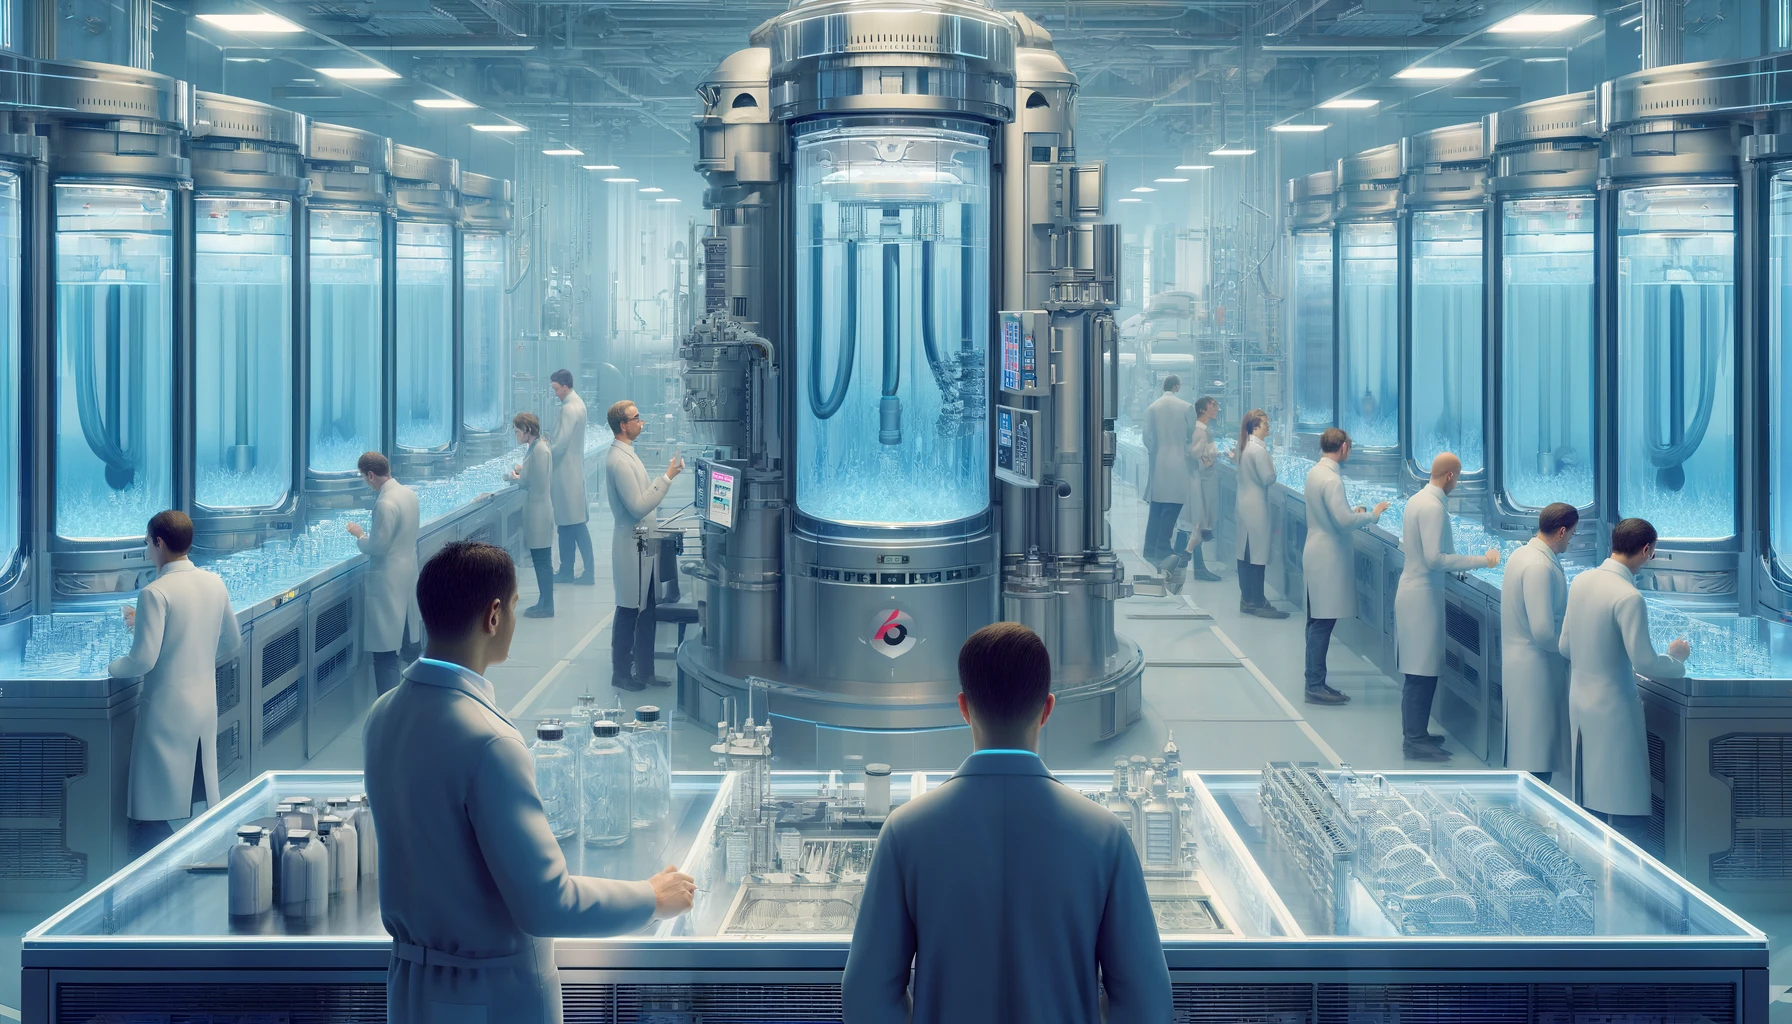 Here's the illustration for the article, now depicting the pharmaceutical company's AI-powered water purification system used to produce tubing for respiratory devices. The scene is set in a cooler-toned modern laboratory, emphasizing the precise and sterile environment necessary for such high-quality manufacturing. The main characters are actively engaged with the technology, highlighted by the cooler color palette and selective focus.